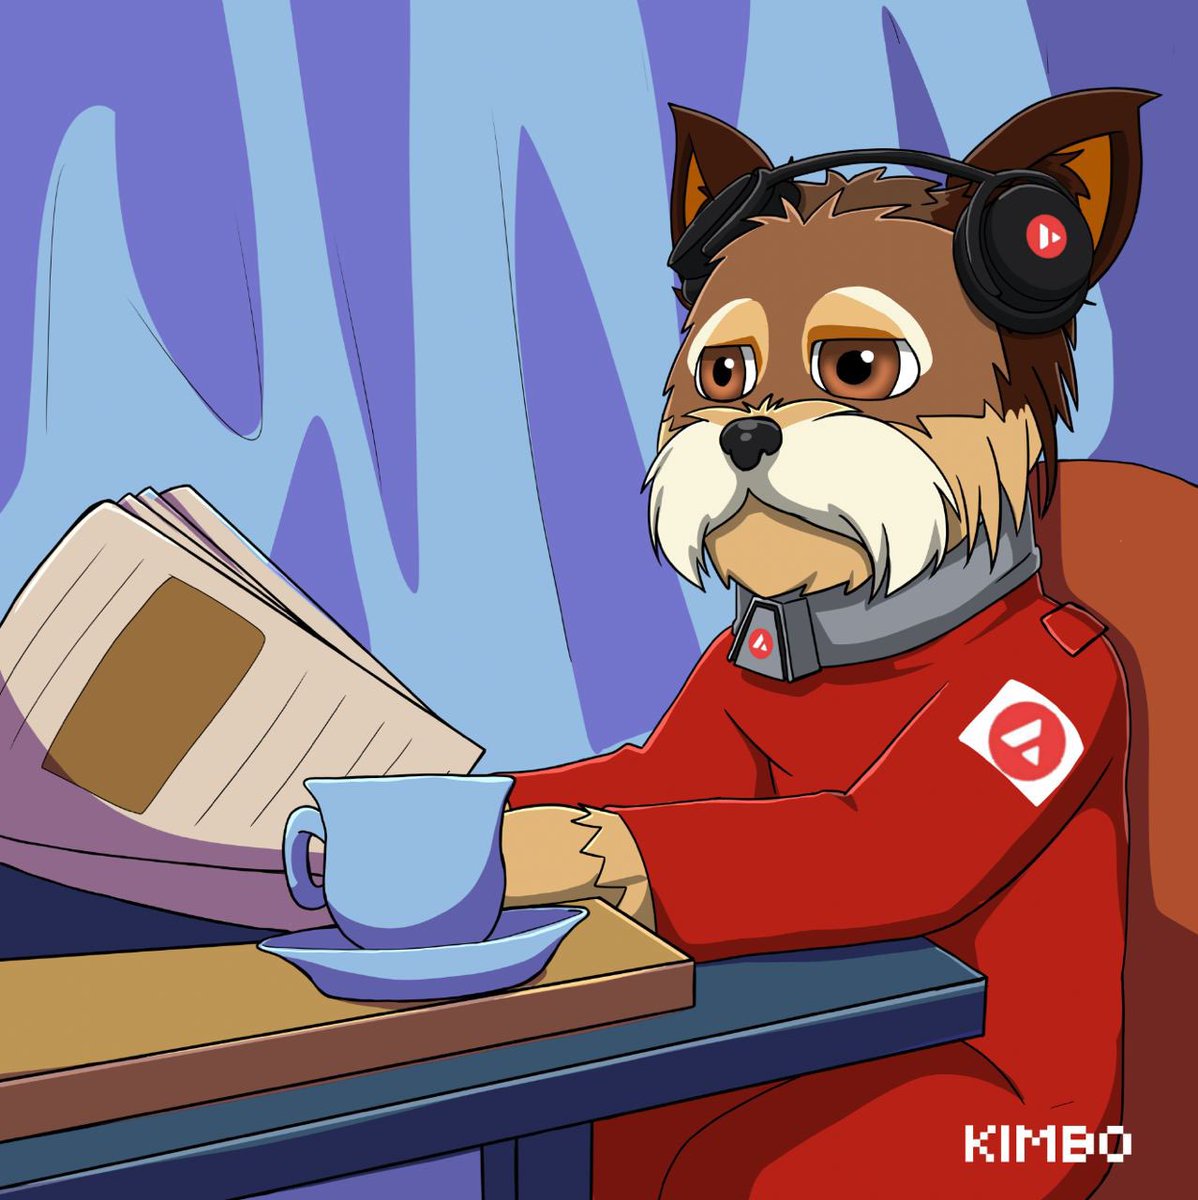 Goodmorning Kimbros! 🐶 We are currently working on a lot of cool things including a collab with a great cartoonist. A lot of new meme content is coming so be ready to engage big time!🔥 $KIMBO, the topdog on #Avalanche 🔺